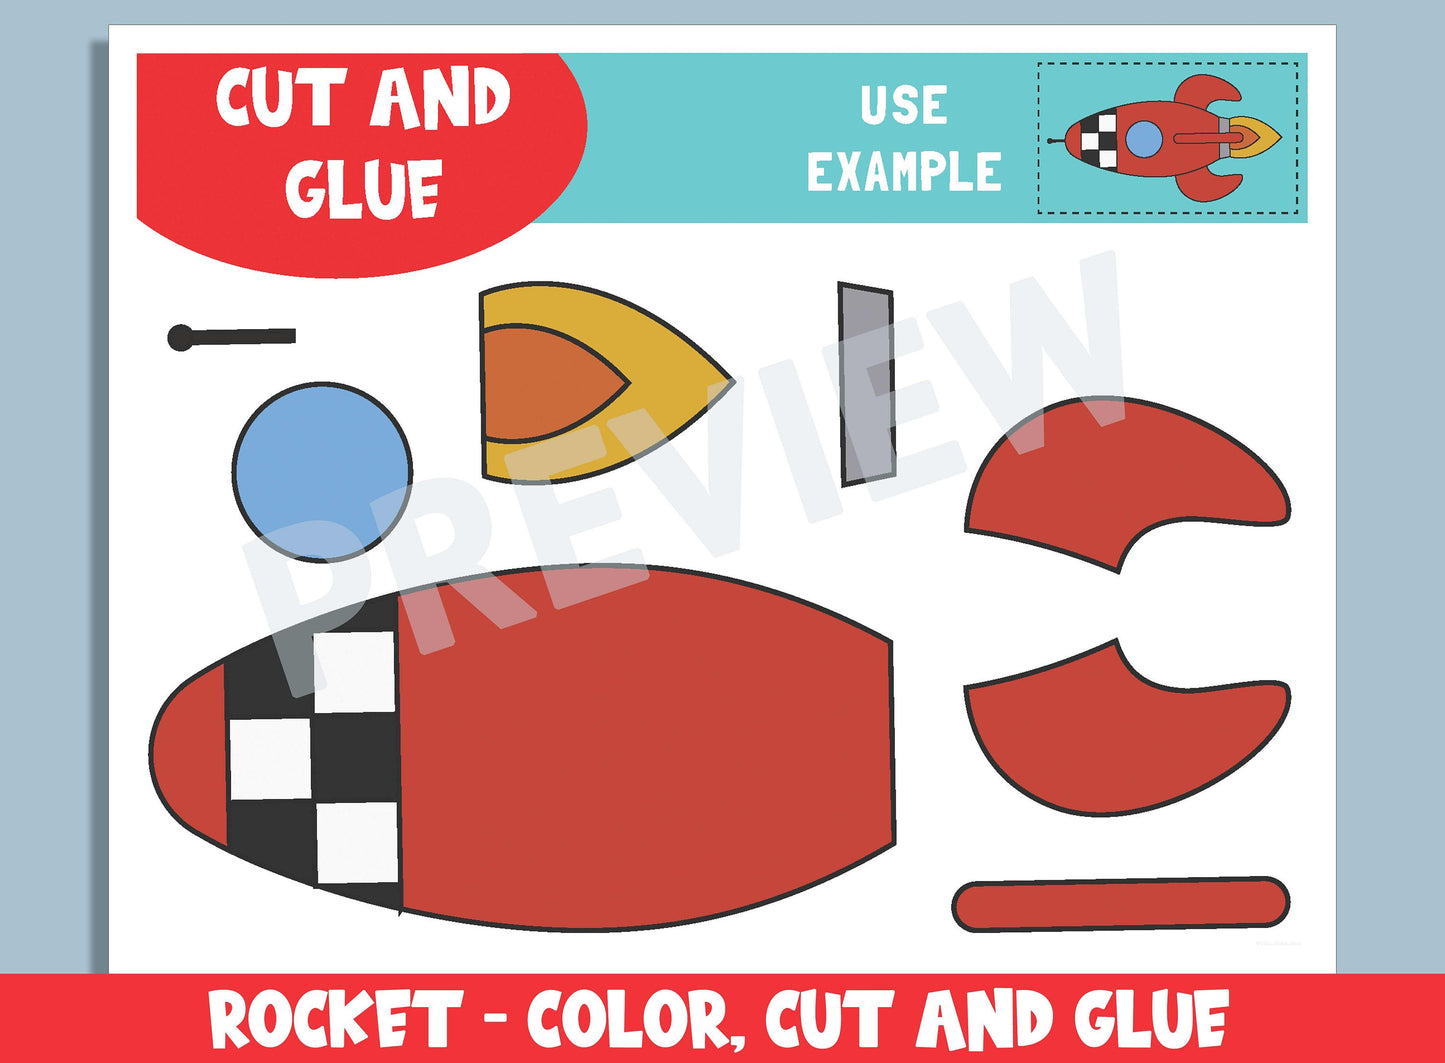 Rocket Craft Activity - Color, Cut, and Glue for PreK to 2nd Grade, PDF File, Instant Download